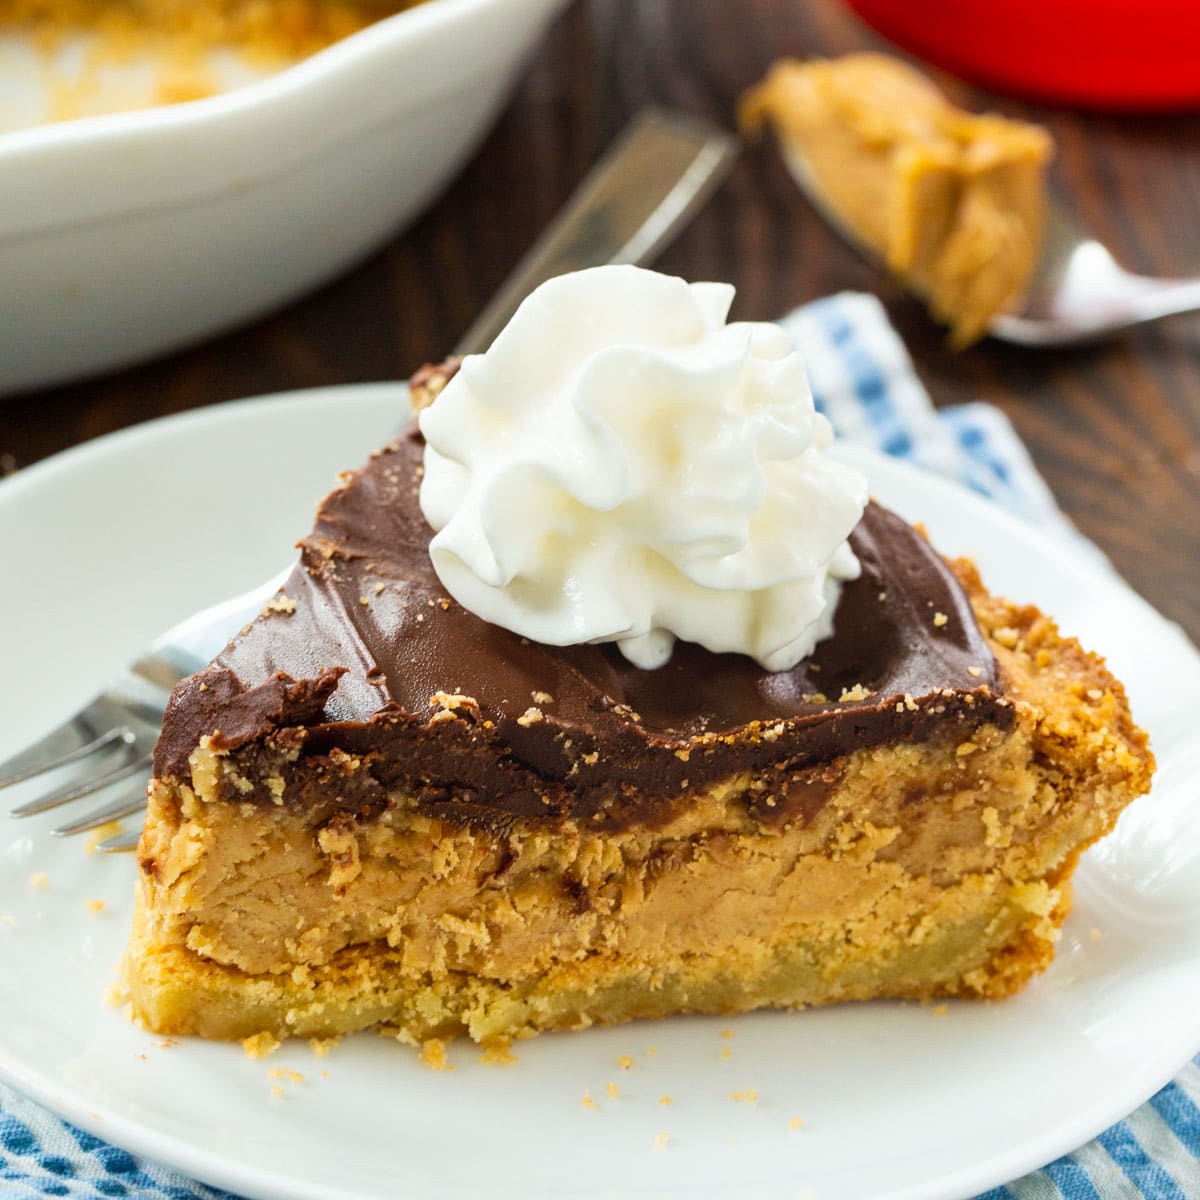 Chocolate and Peanut Butter Pie